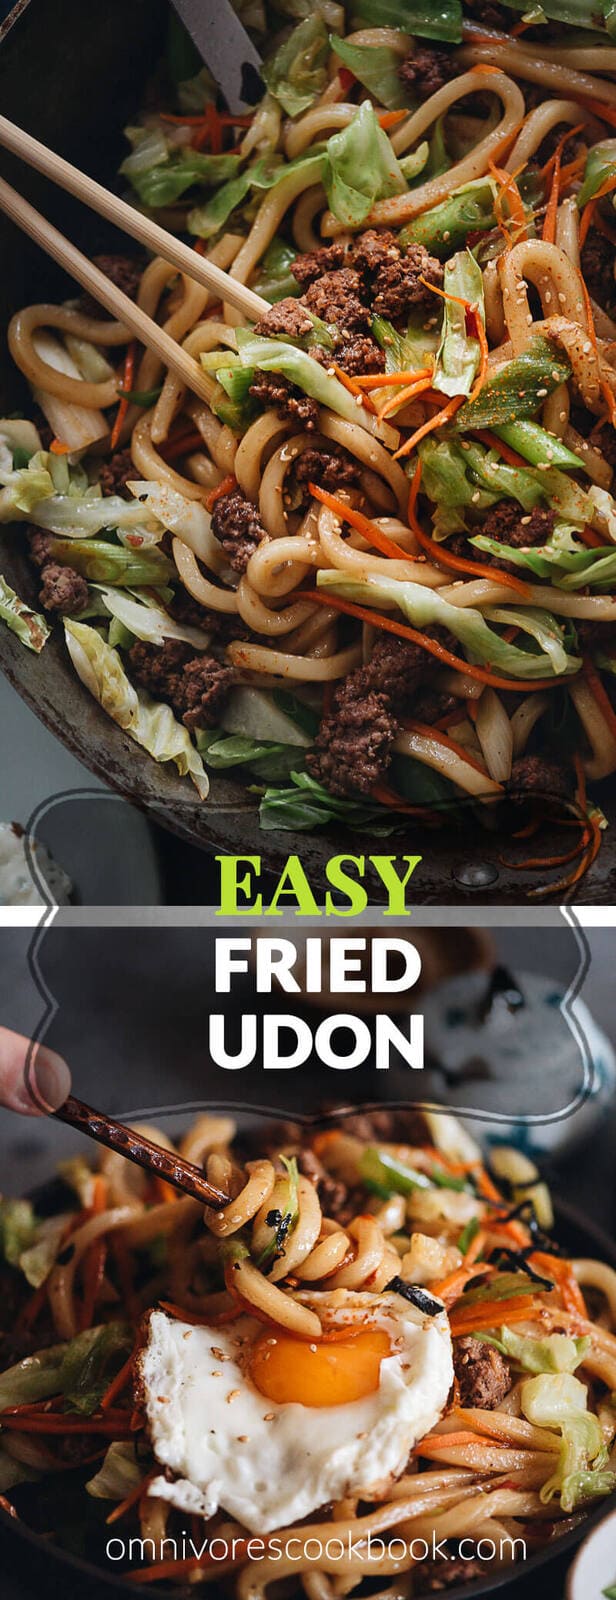 Easy Fried Udon - An easy fried udon recipe with a Chinese twist that yields a rich result that tastes like a beef burger. The recipe calls for very basic ingredients and doesn’t require a wok. Try it out if you like takeout - you’ll like this homemade version even better.